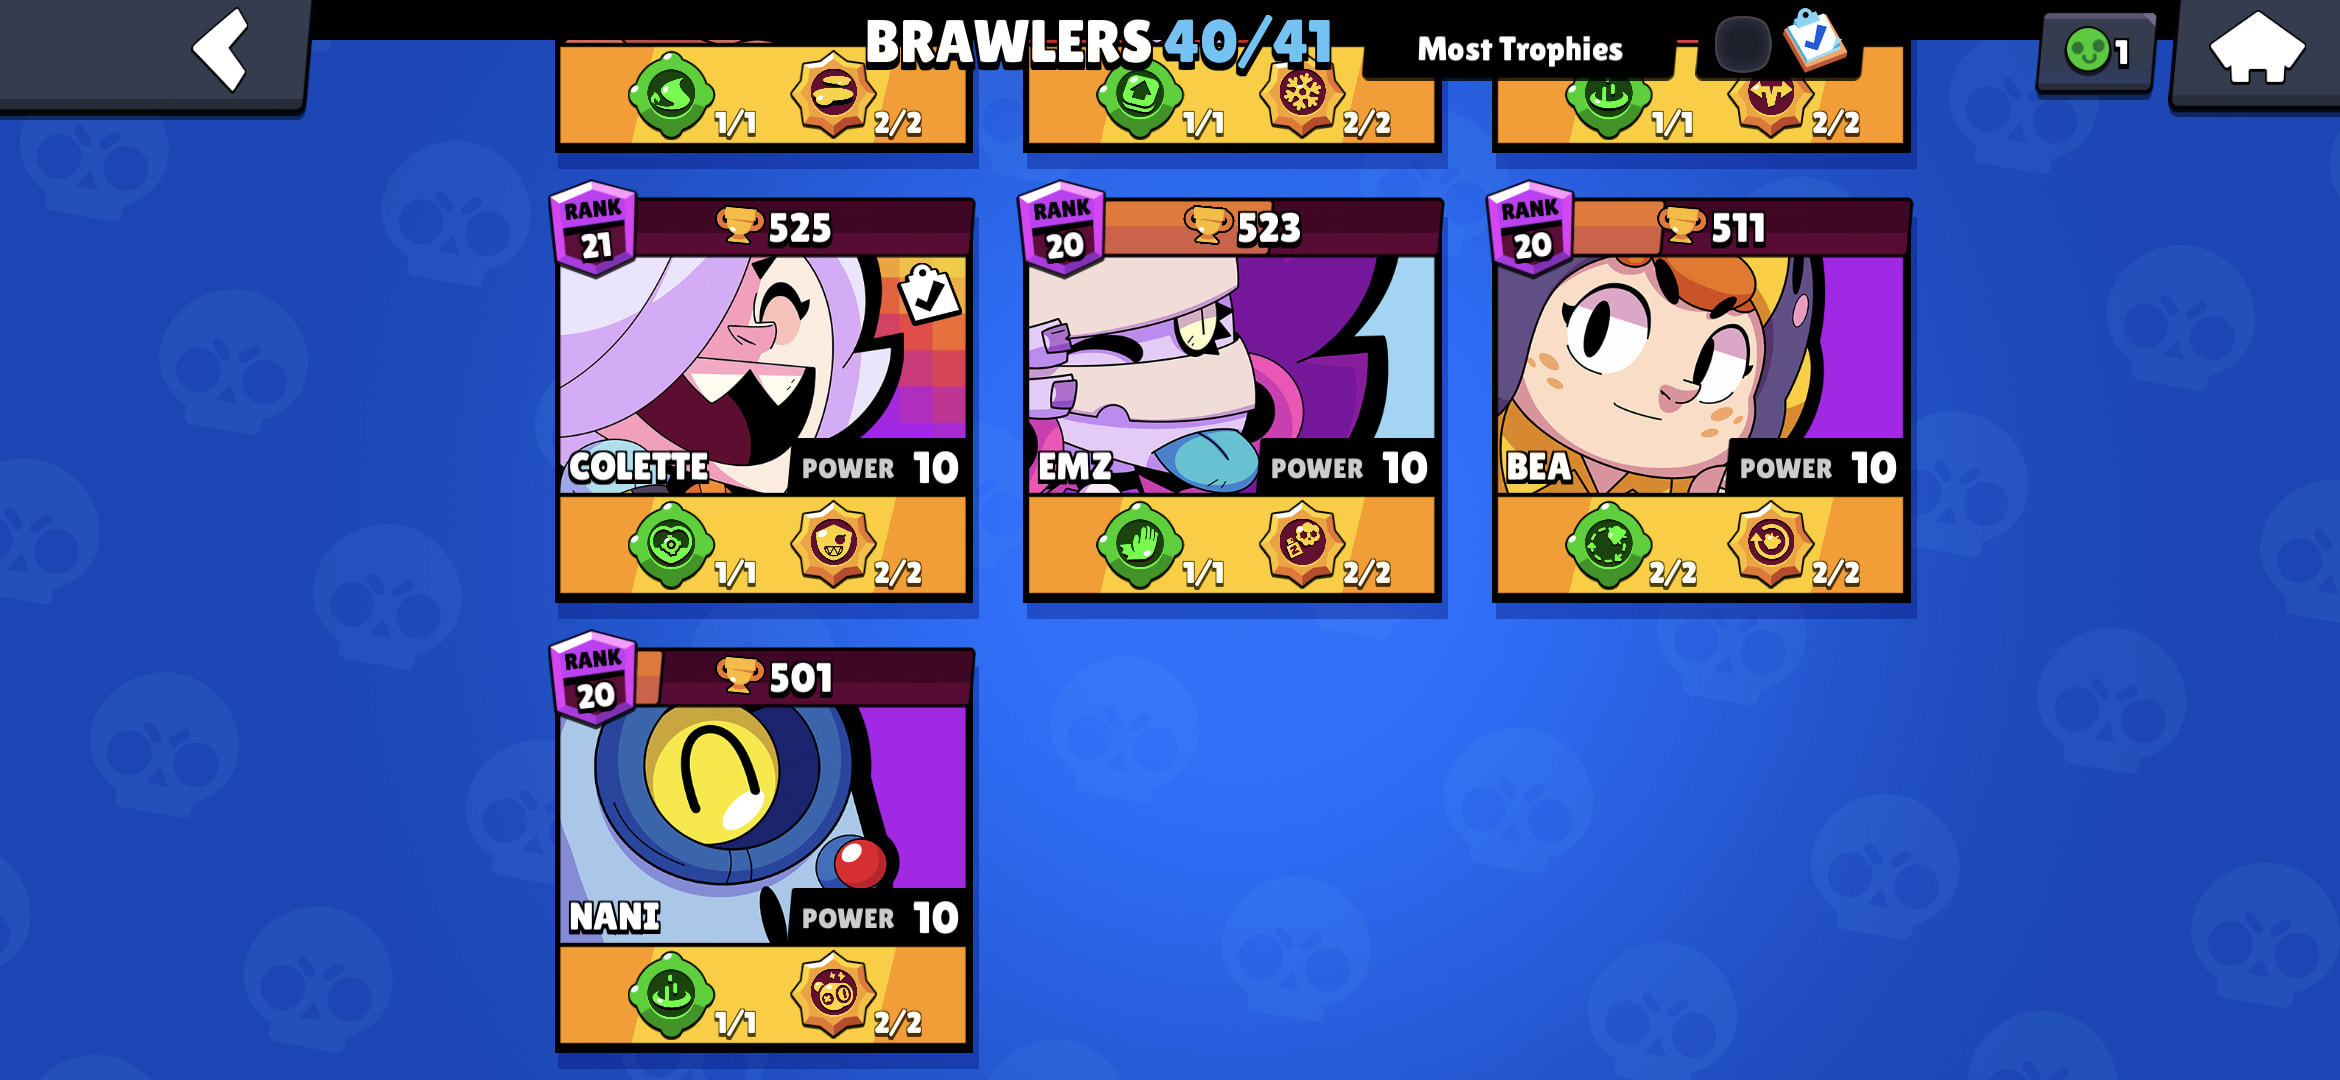 In Depth Brawl Stars Assistance By Skyconnormcl Fiverr - 20 rank png brawl stars